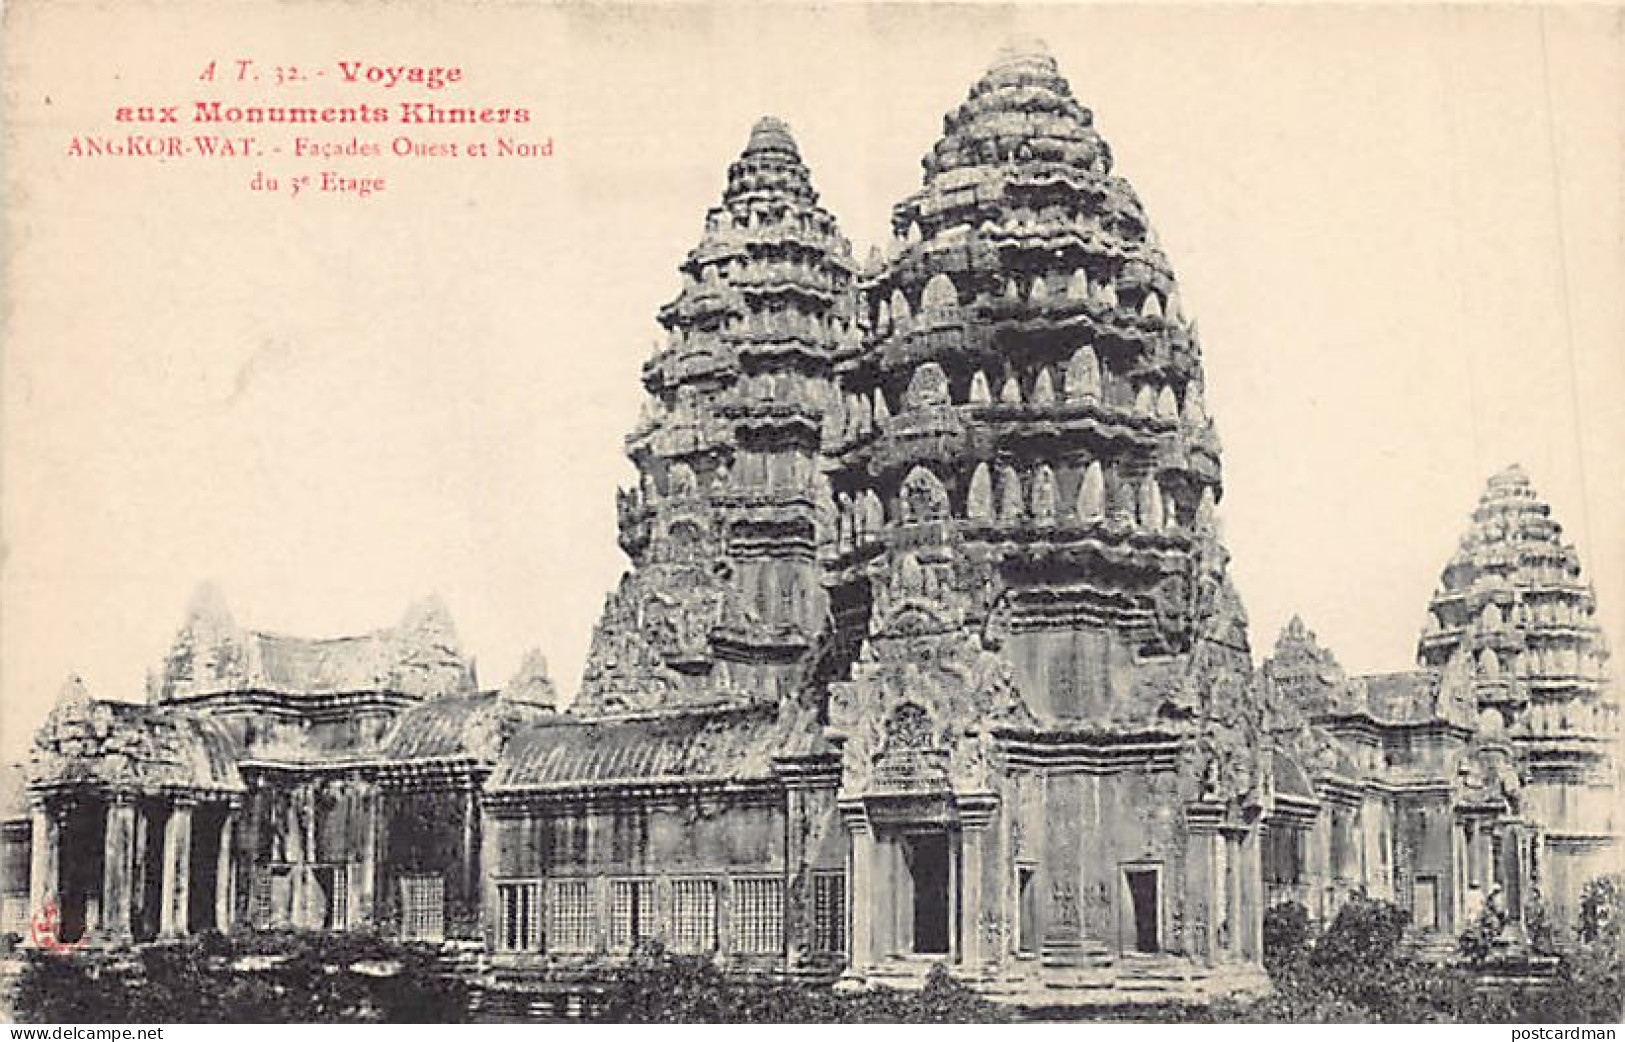 Cambodge - Voyage Aux Monuments Khmers - ANGKOR VAT - Façades Ouest Et Nord - Ed. A. T. 32 - Cambodia